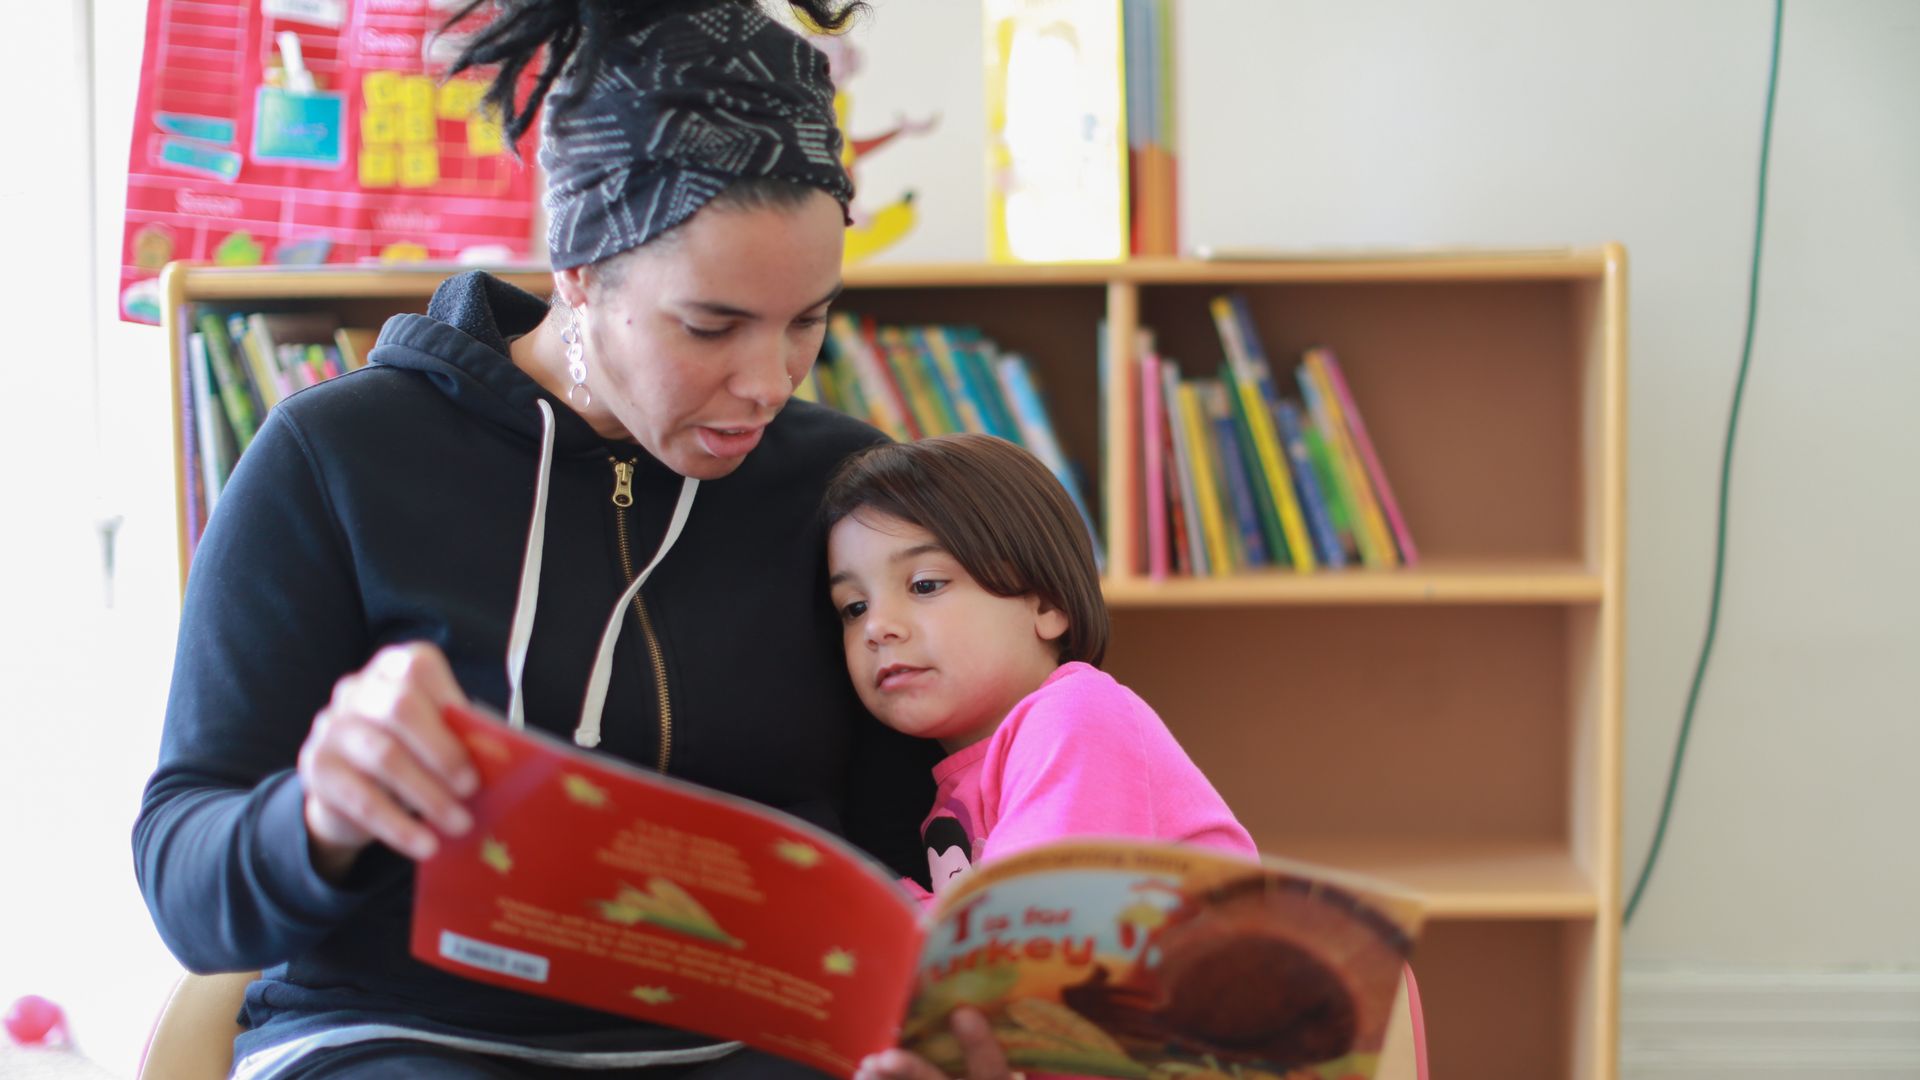 A volunteer reads to a child